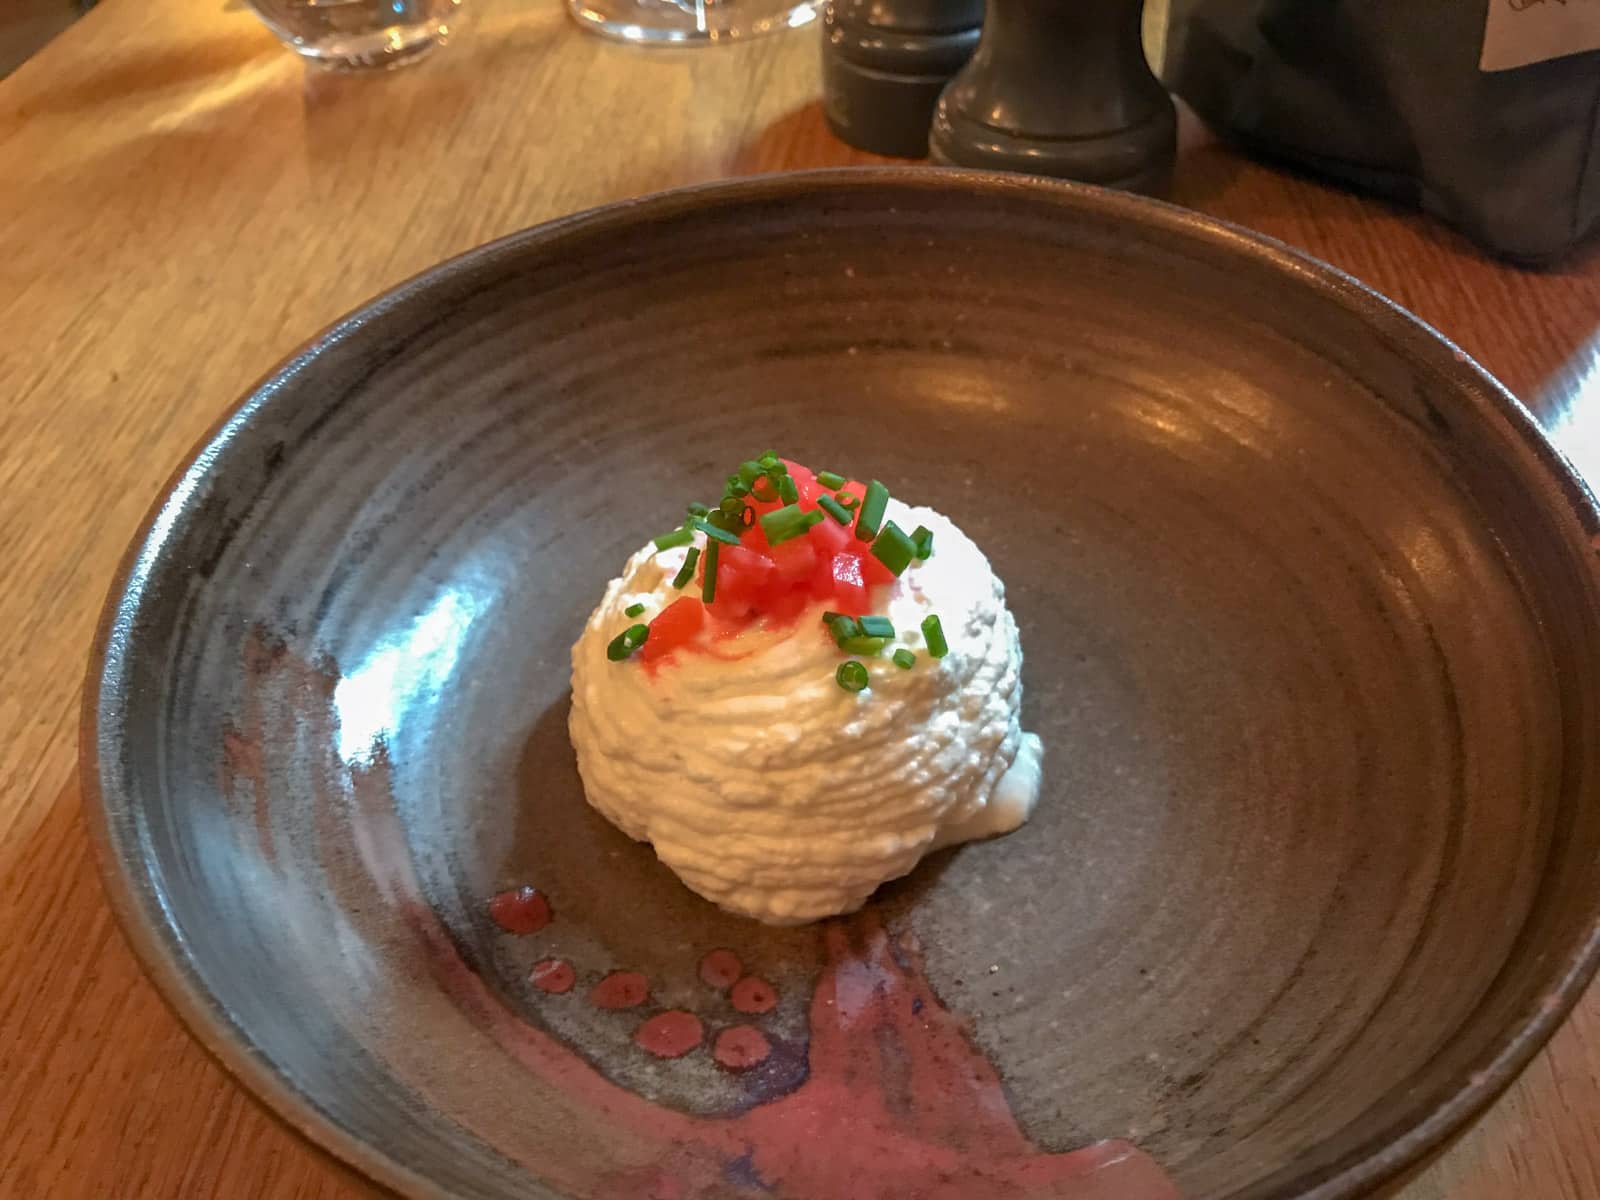 A round, shallow brown bowl with a serving of an appetiser made of ricotta cheese, garnished with red leek